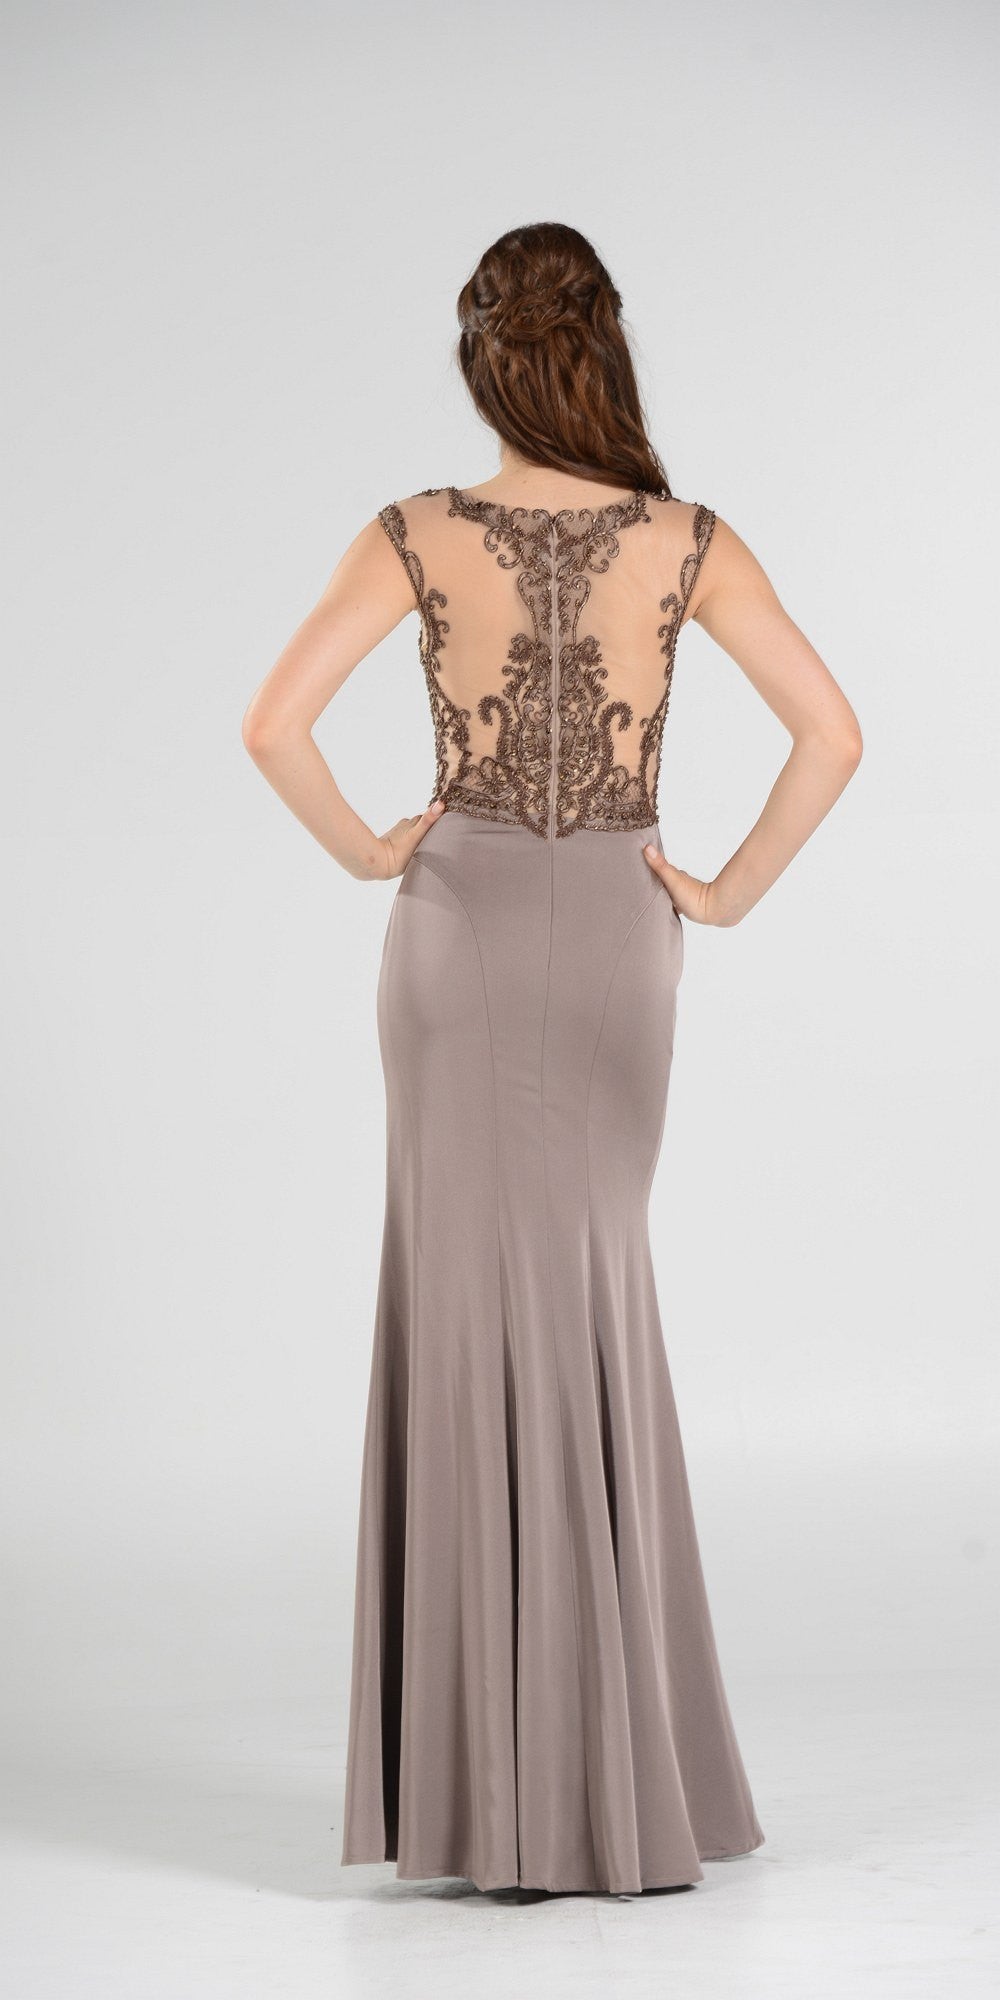 Scoop Neck Appliqued Bodice Fit and Flare Prom Gown Mocha Cap Sleeves